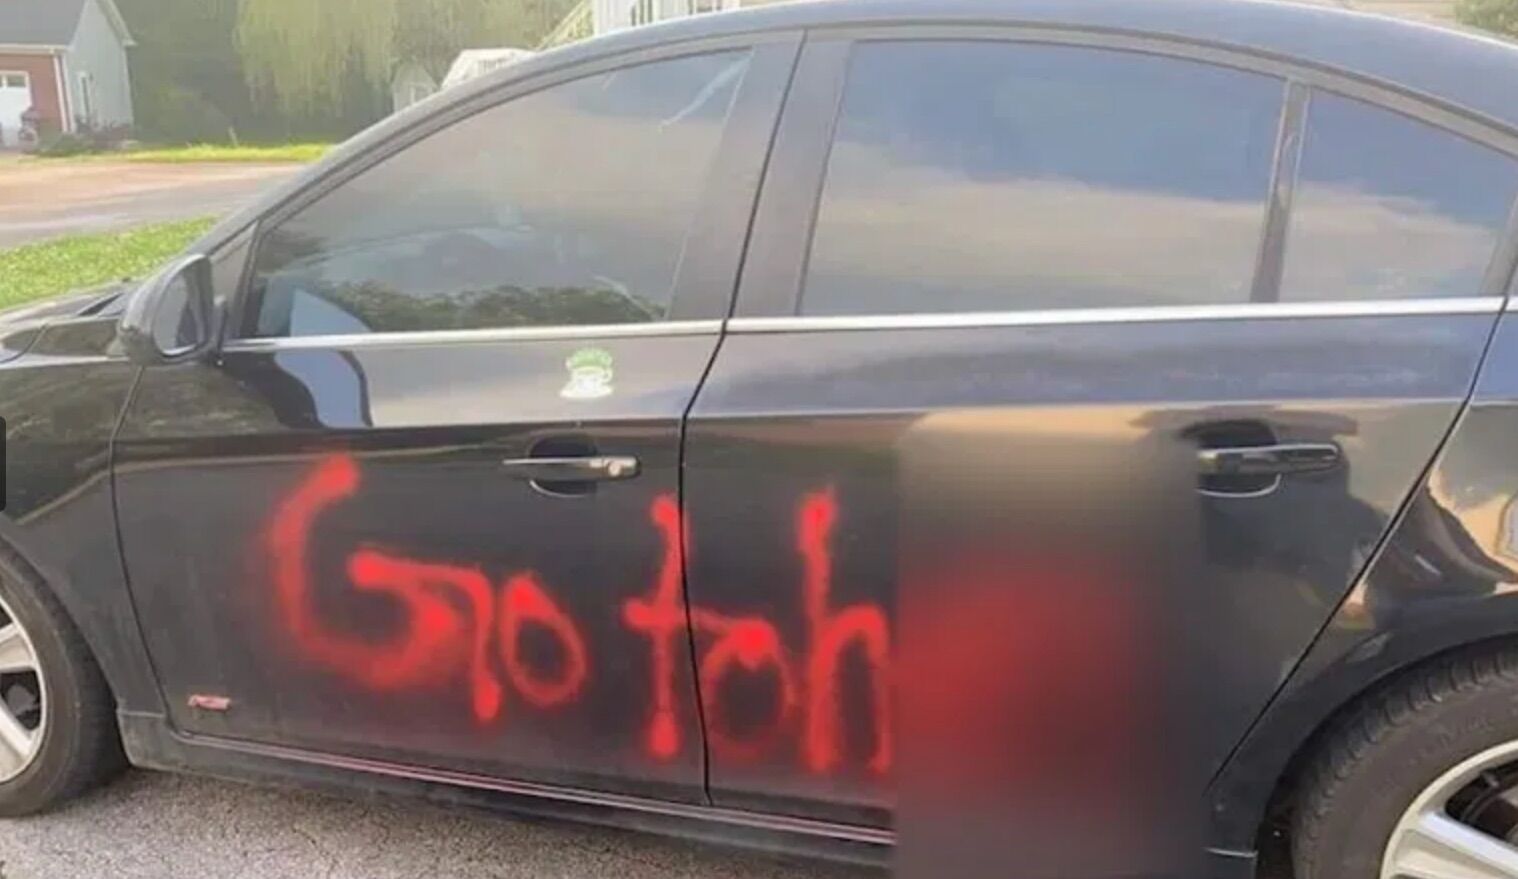 The vehicle was spray-painted with an anti-LGBTQ slur on the other side.